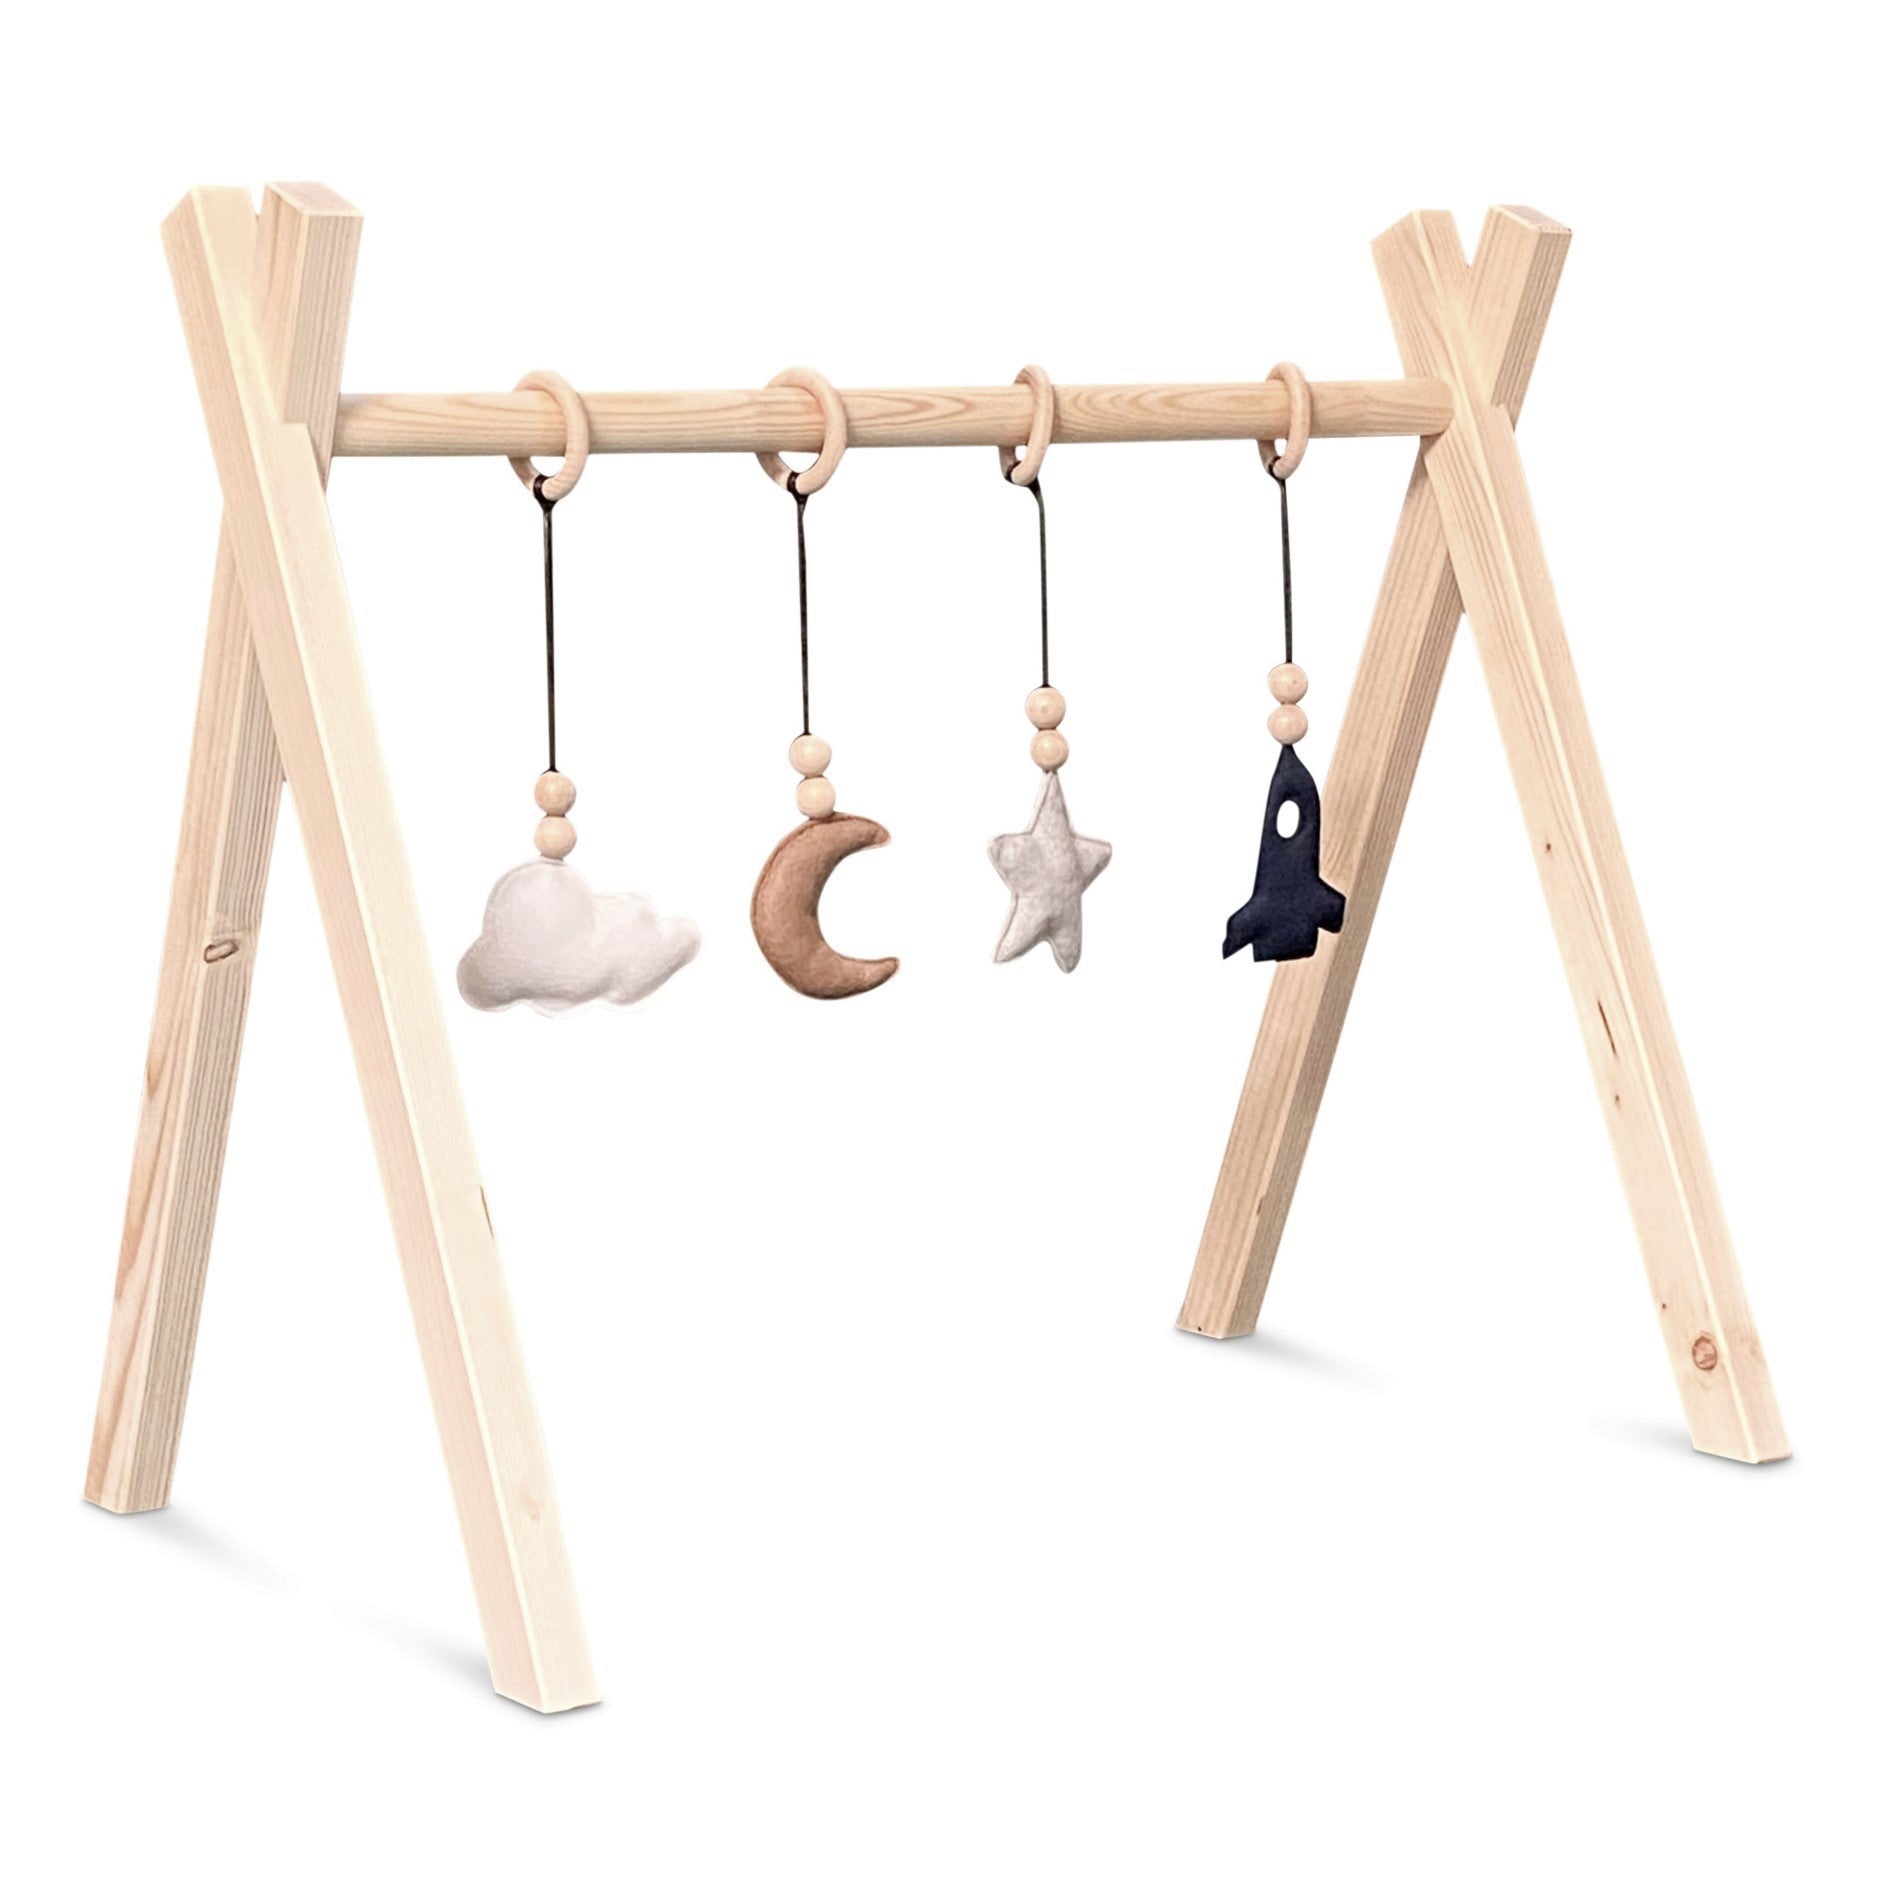 Wooden baby gym, with space felt hangers - toddie.com